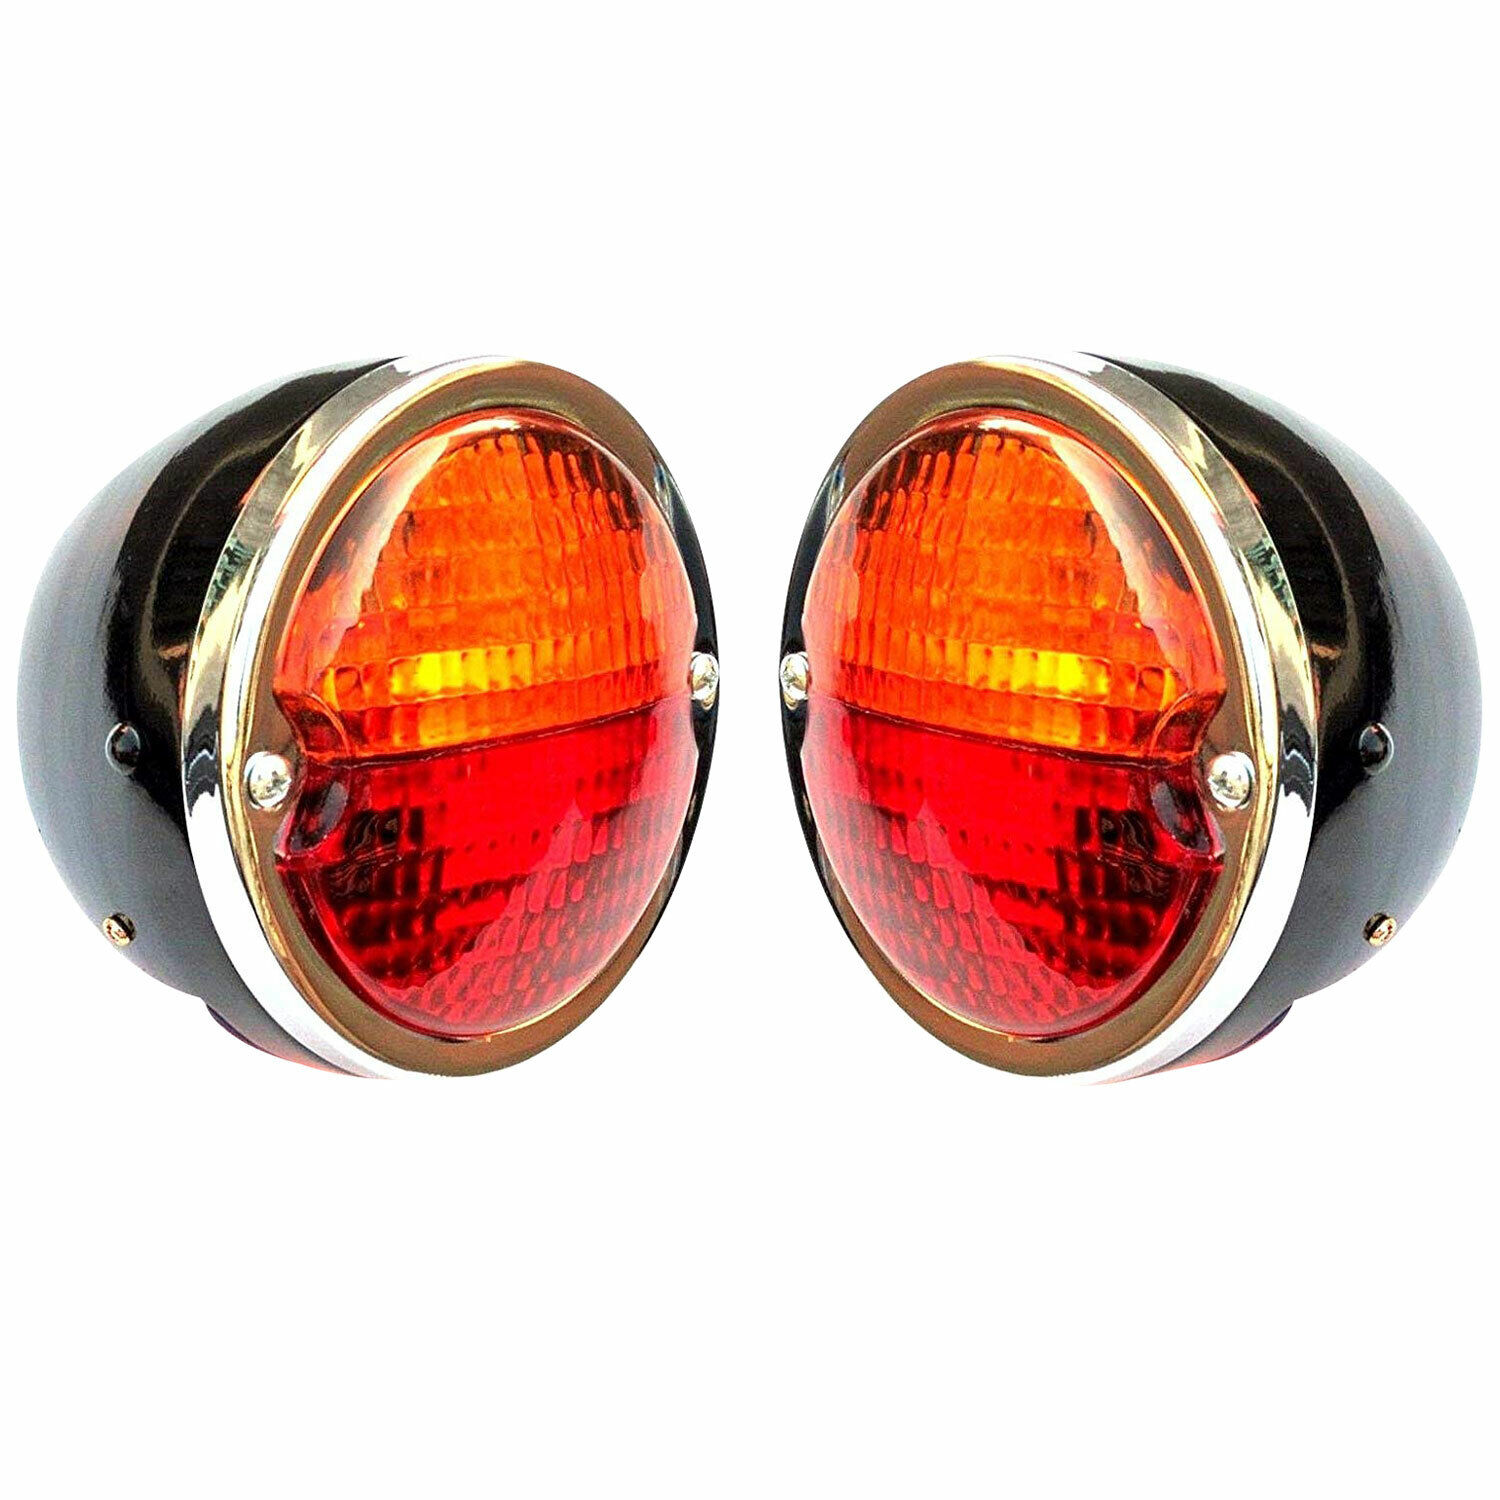 Tail Light Black Body Chrome Ring Lens Amber Red Jeep Willy MF John Deer Tractor